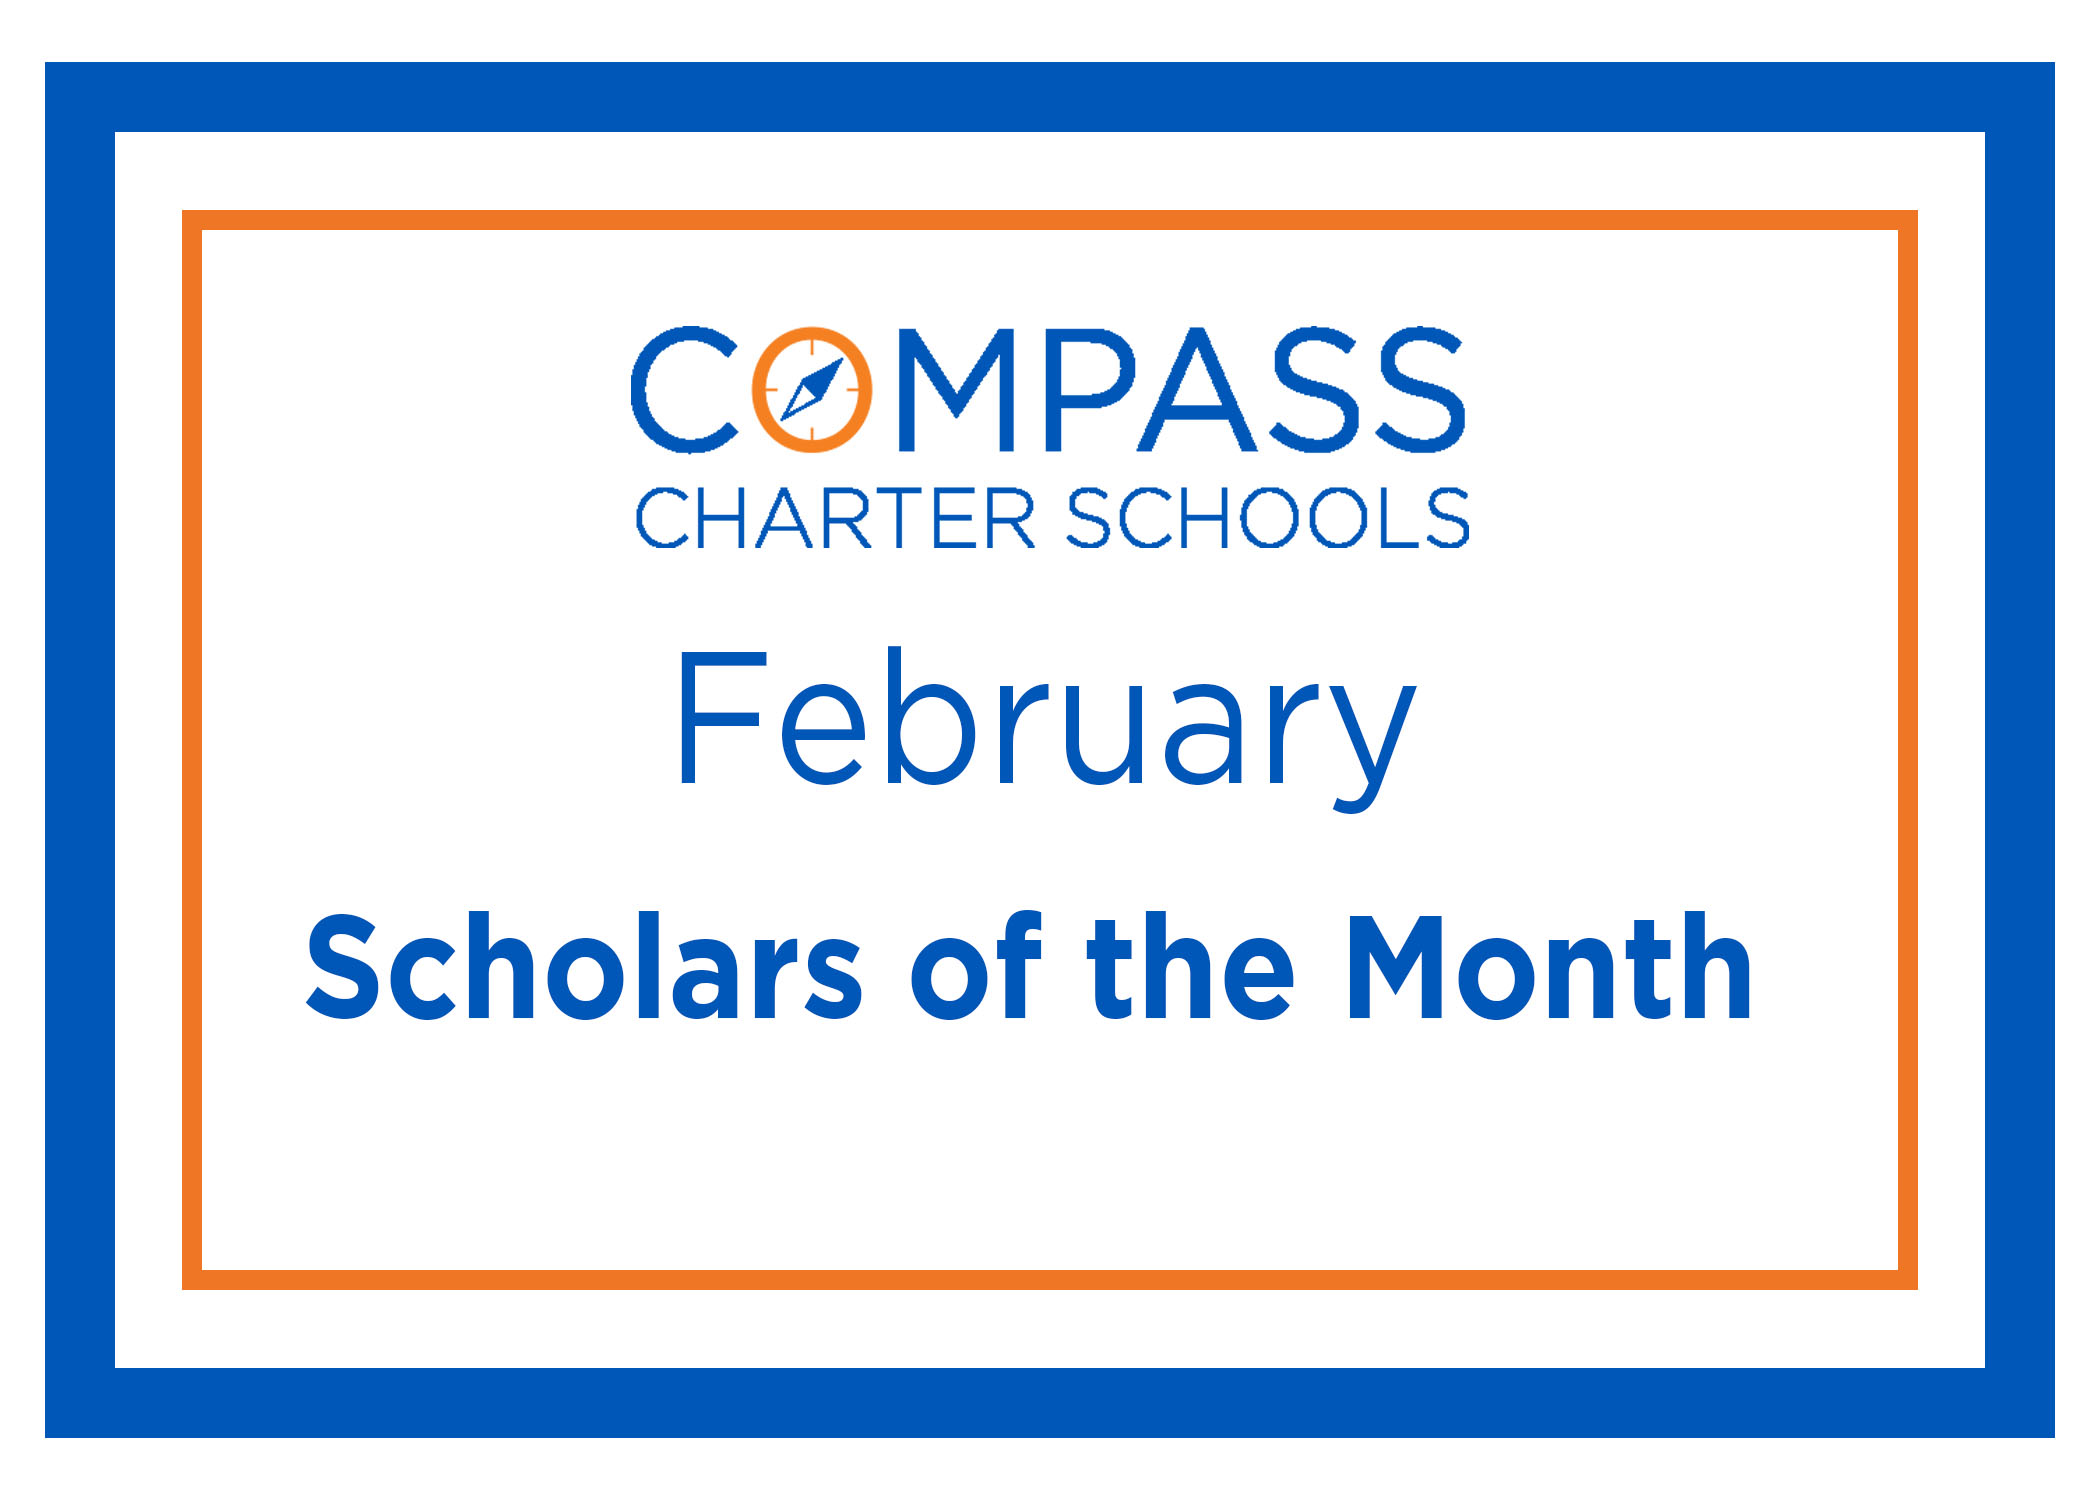 Logo for the Student of the Month SOTW recognitions at Compass Charter Schools, with TK-12 grade online and homeschool programs.